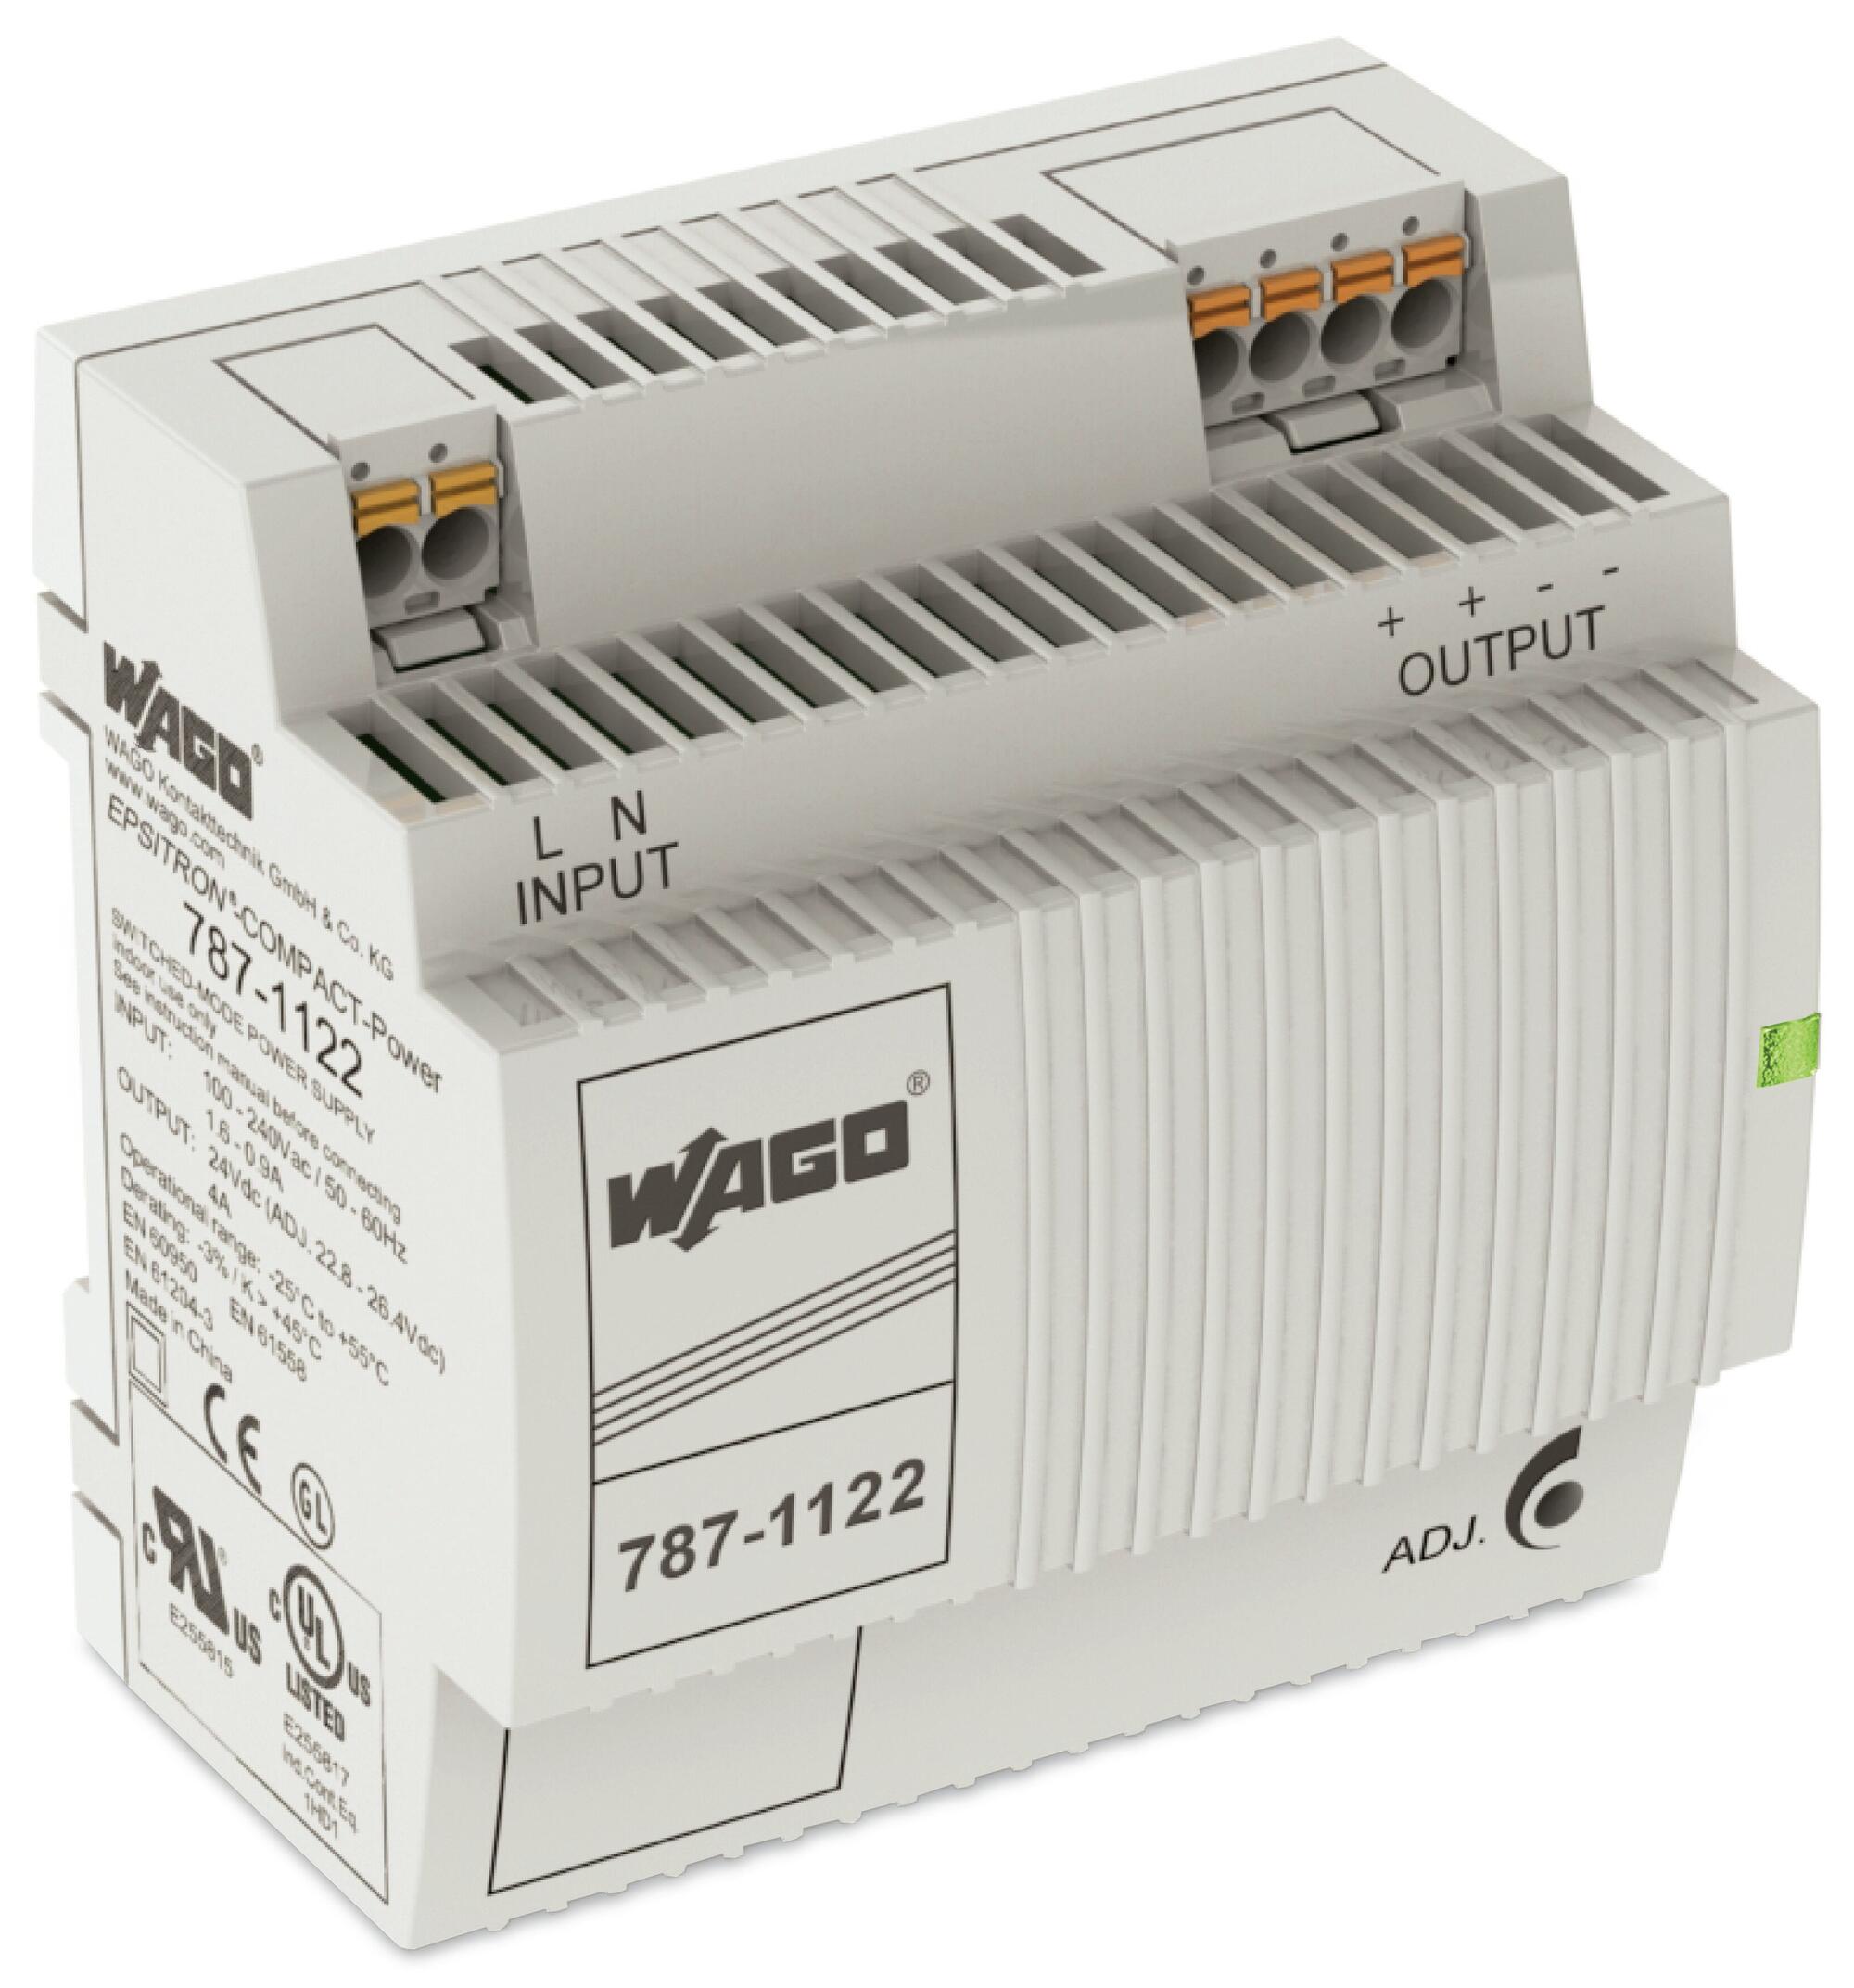 Compact power supply - input 230 Vac, output 27 Vdc 600 mA max. - 2 DIN  modules, E49